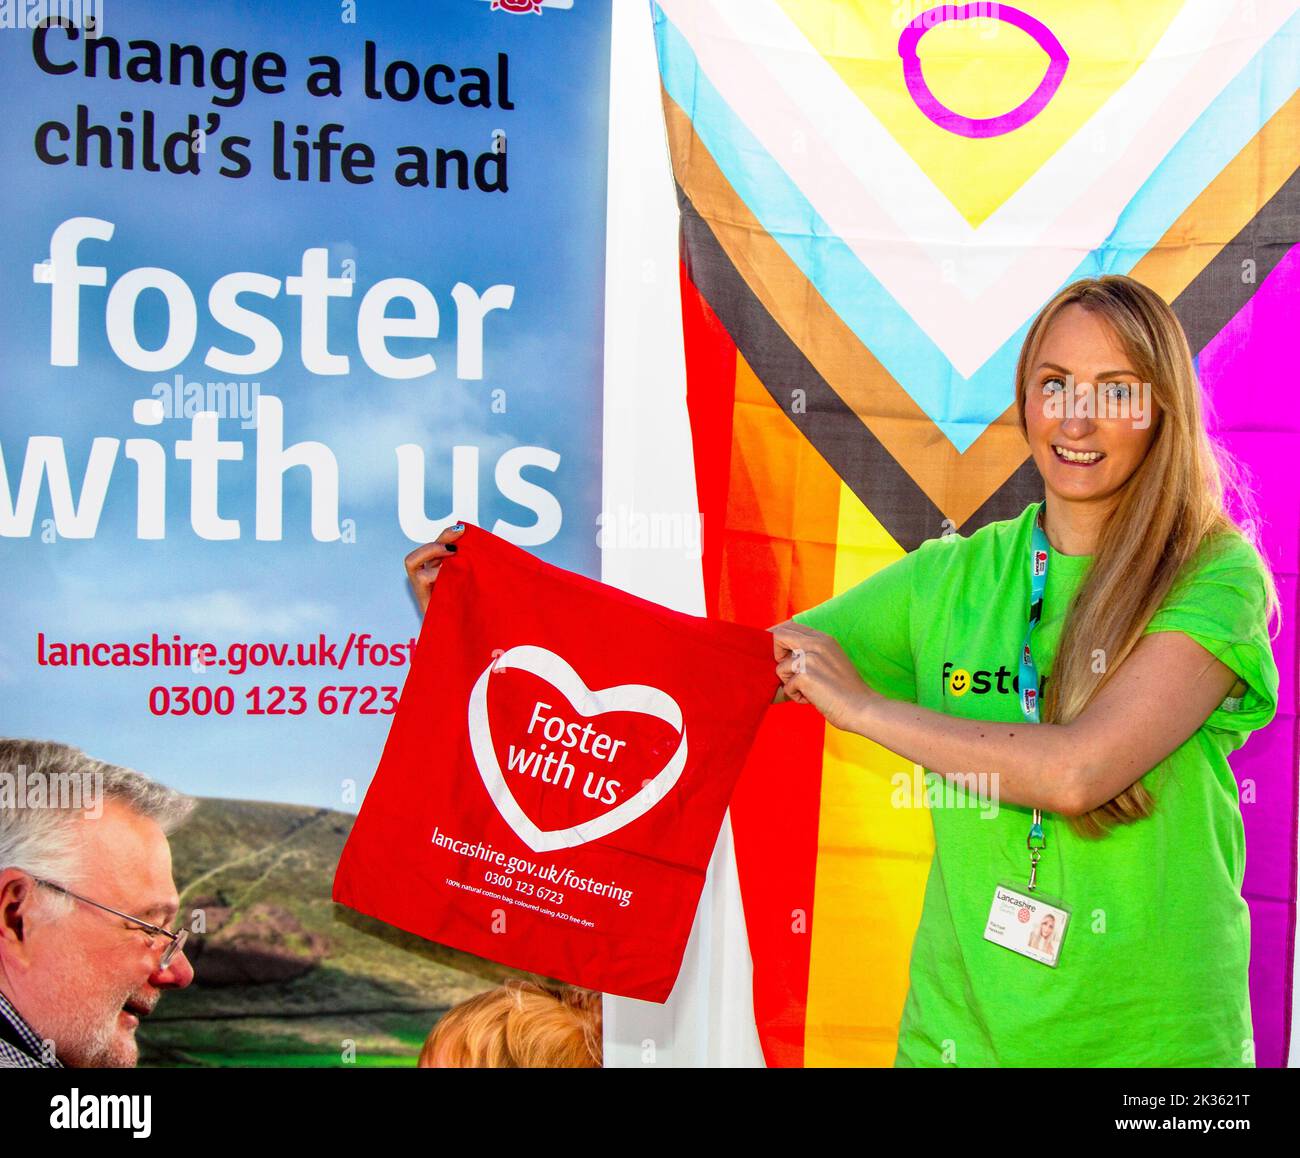 'Rachael Heskth' Foster with us' Lancashire fostering services promotion in Preston, UK Stock Photo